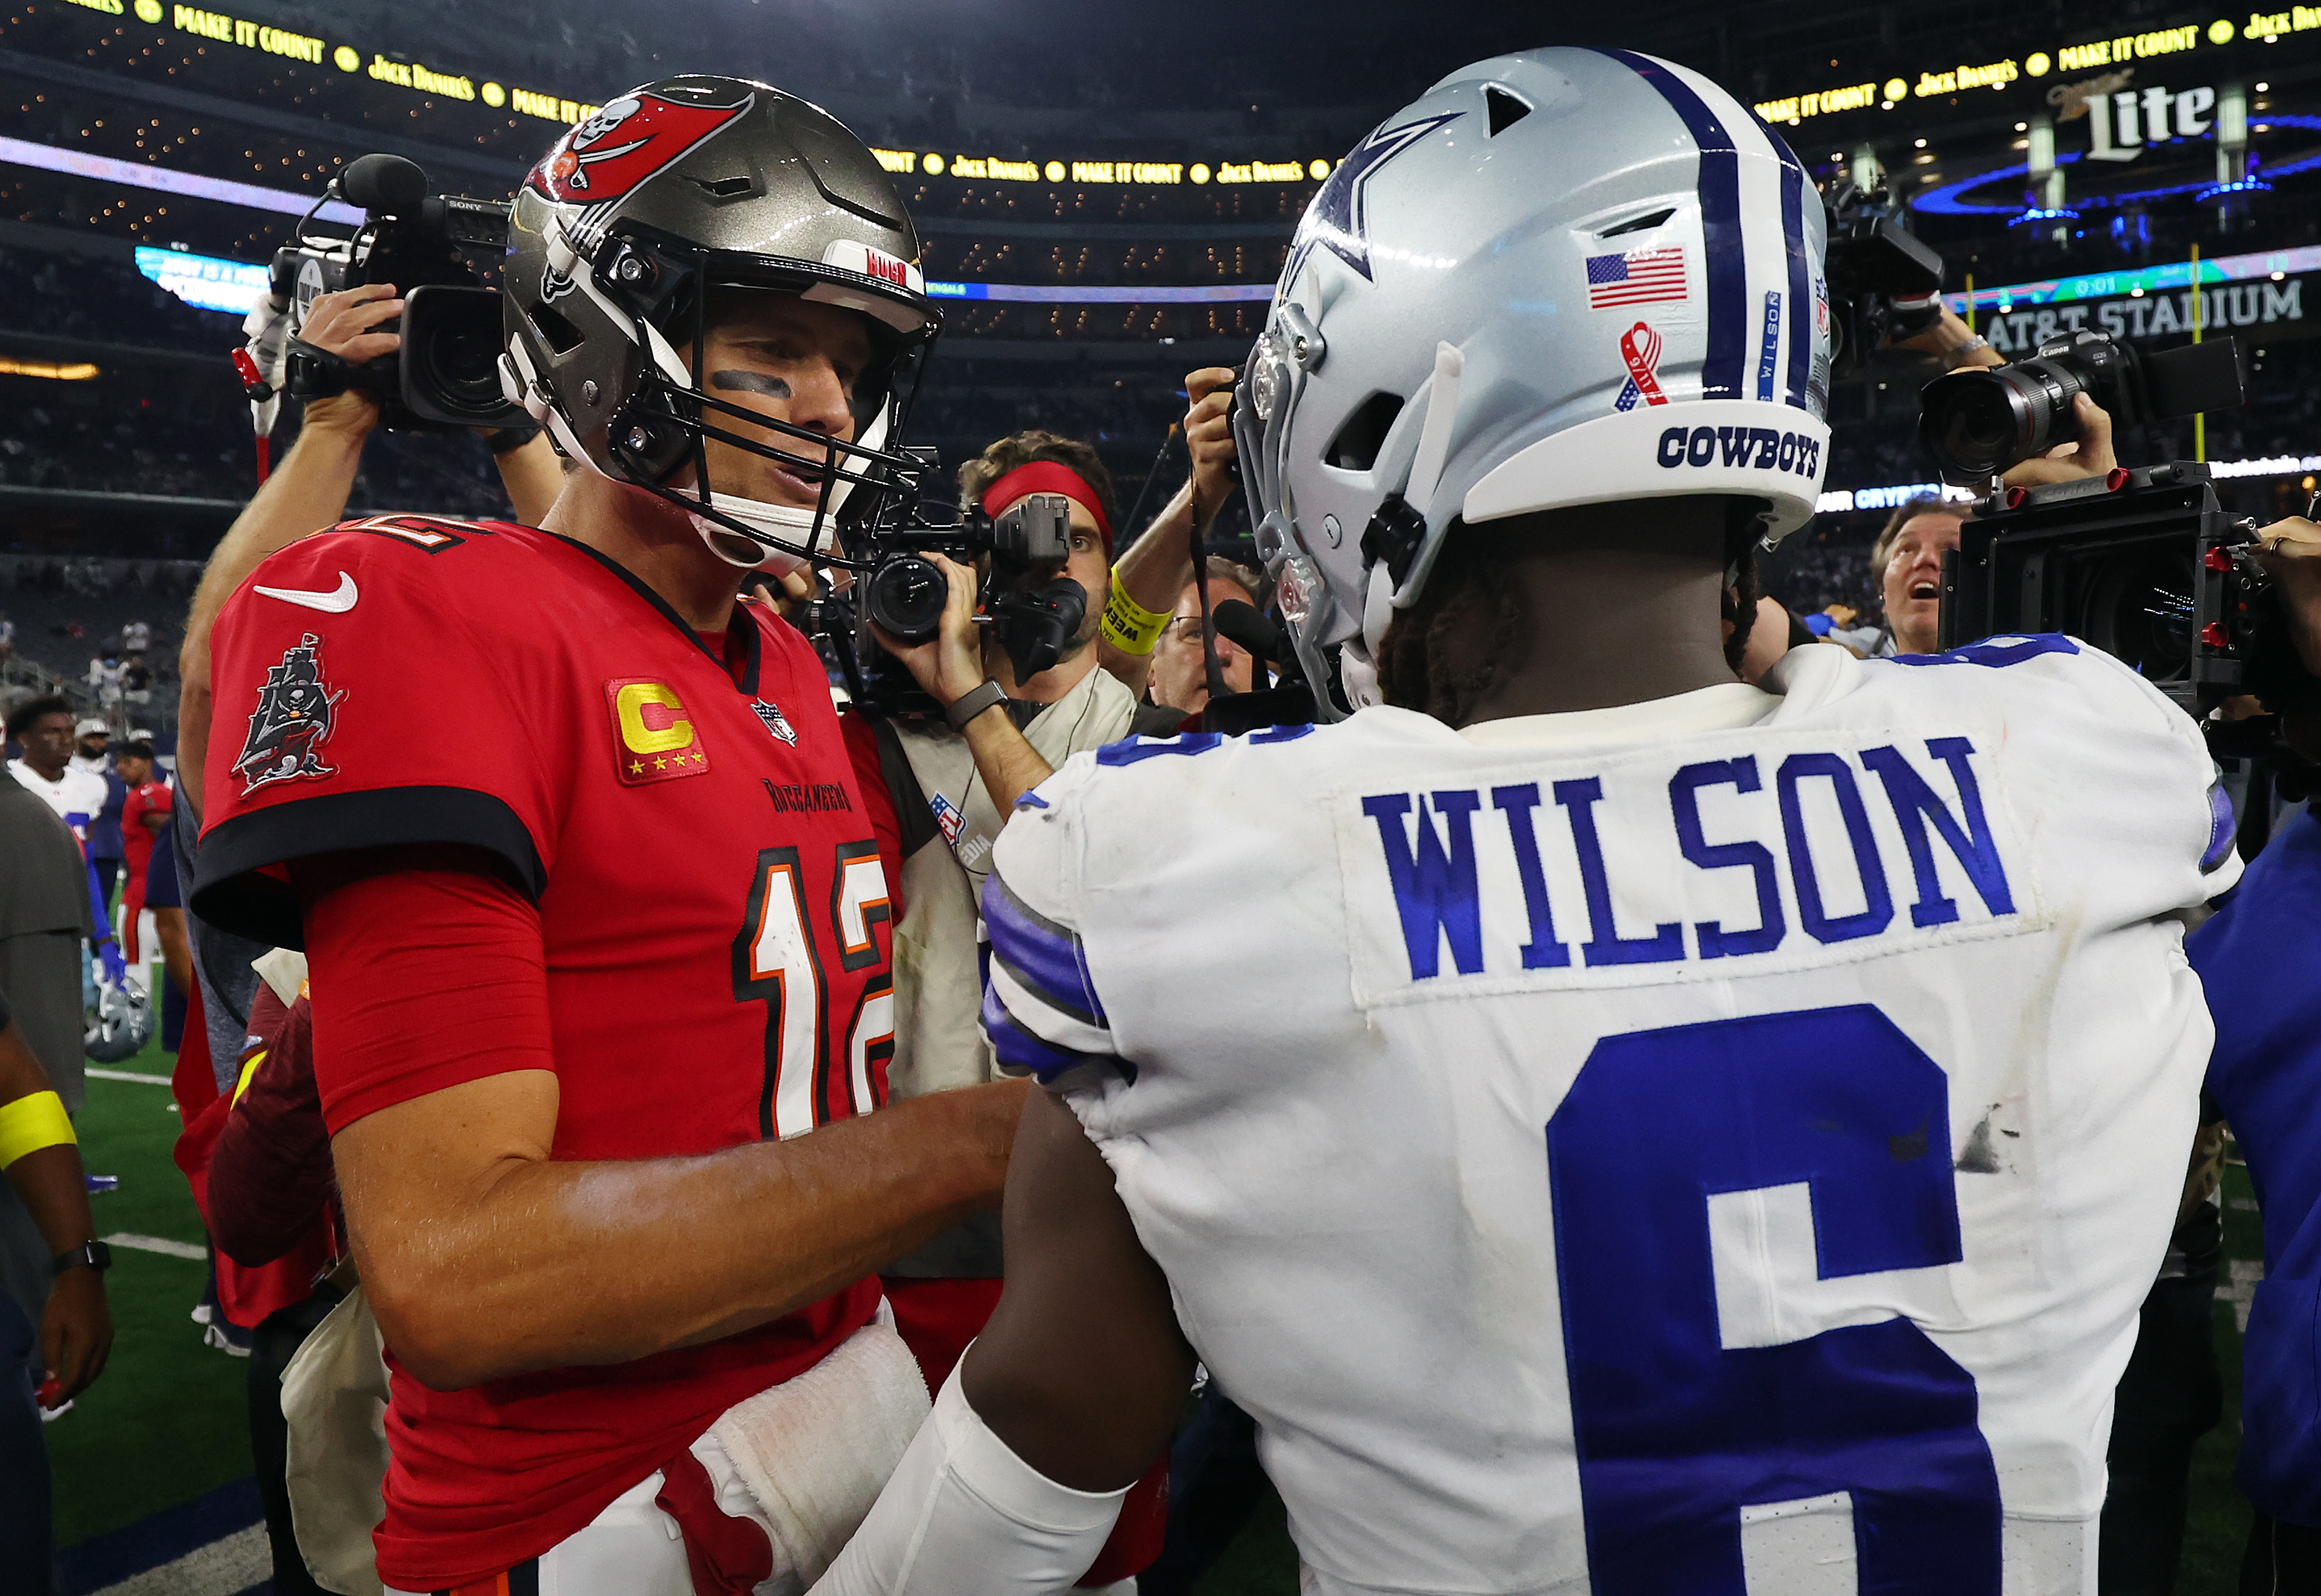 Cowboys playoff schedule: Dallas visits Buccaneers in the Wild